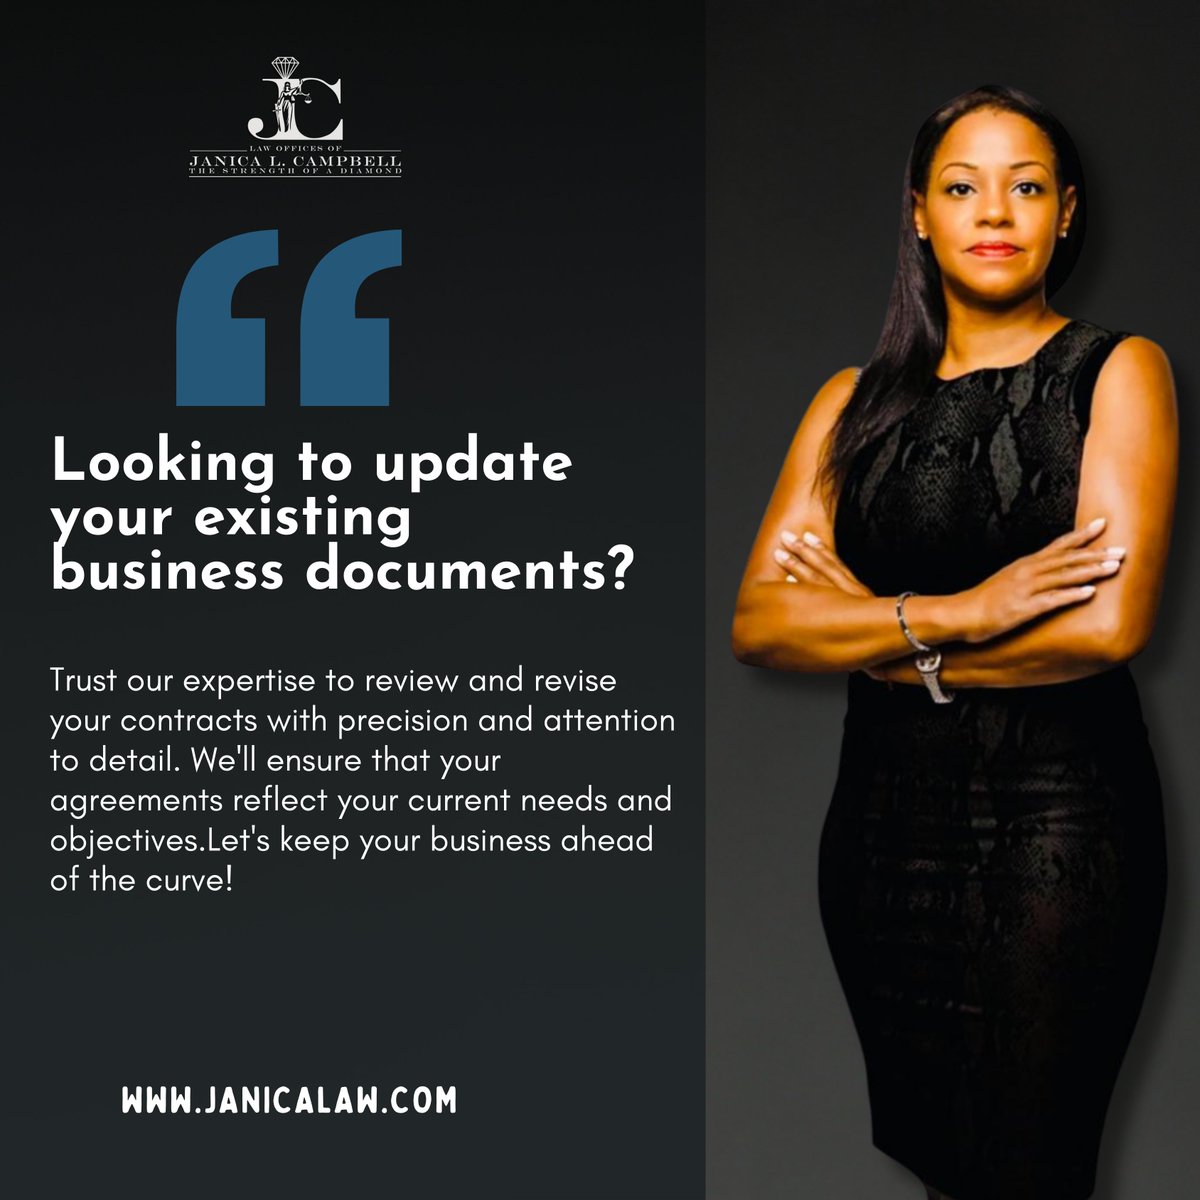 📝✨ Looking to update your existing business documents? Trust our expertise to review and revise your contracts with precision and attention to detail. We'll ensure that your agreements reflect your current needs and objectives. #LegalServices #BusinessSolutions #JanicaLaw #Law